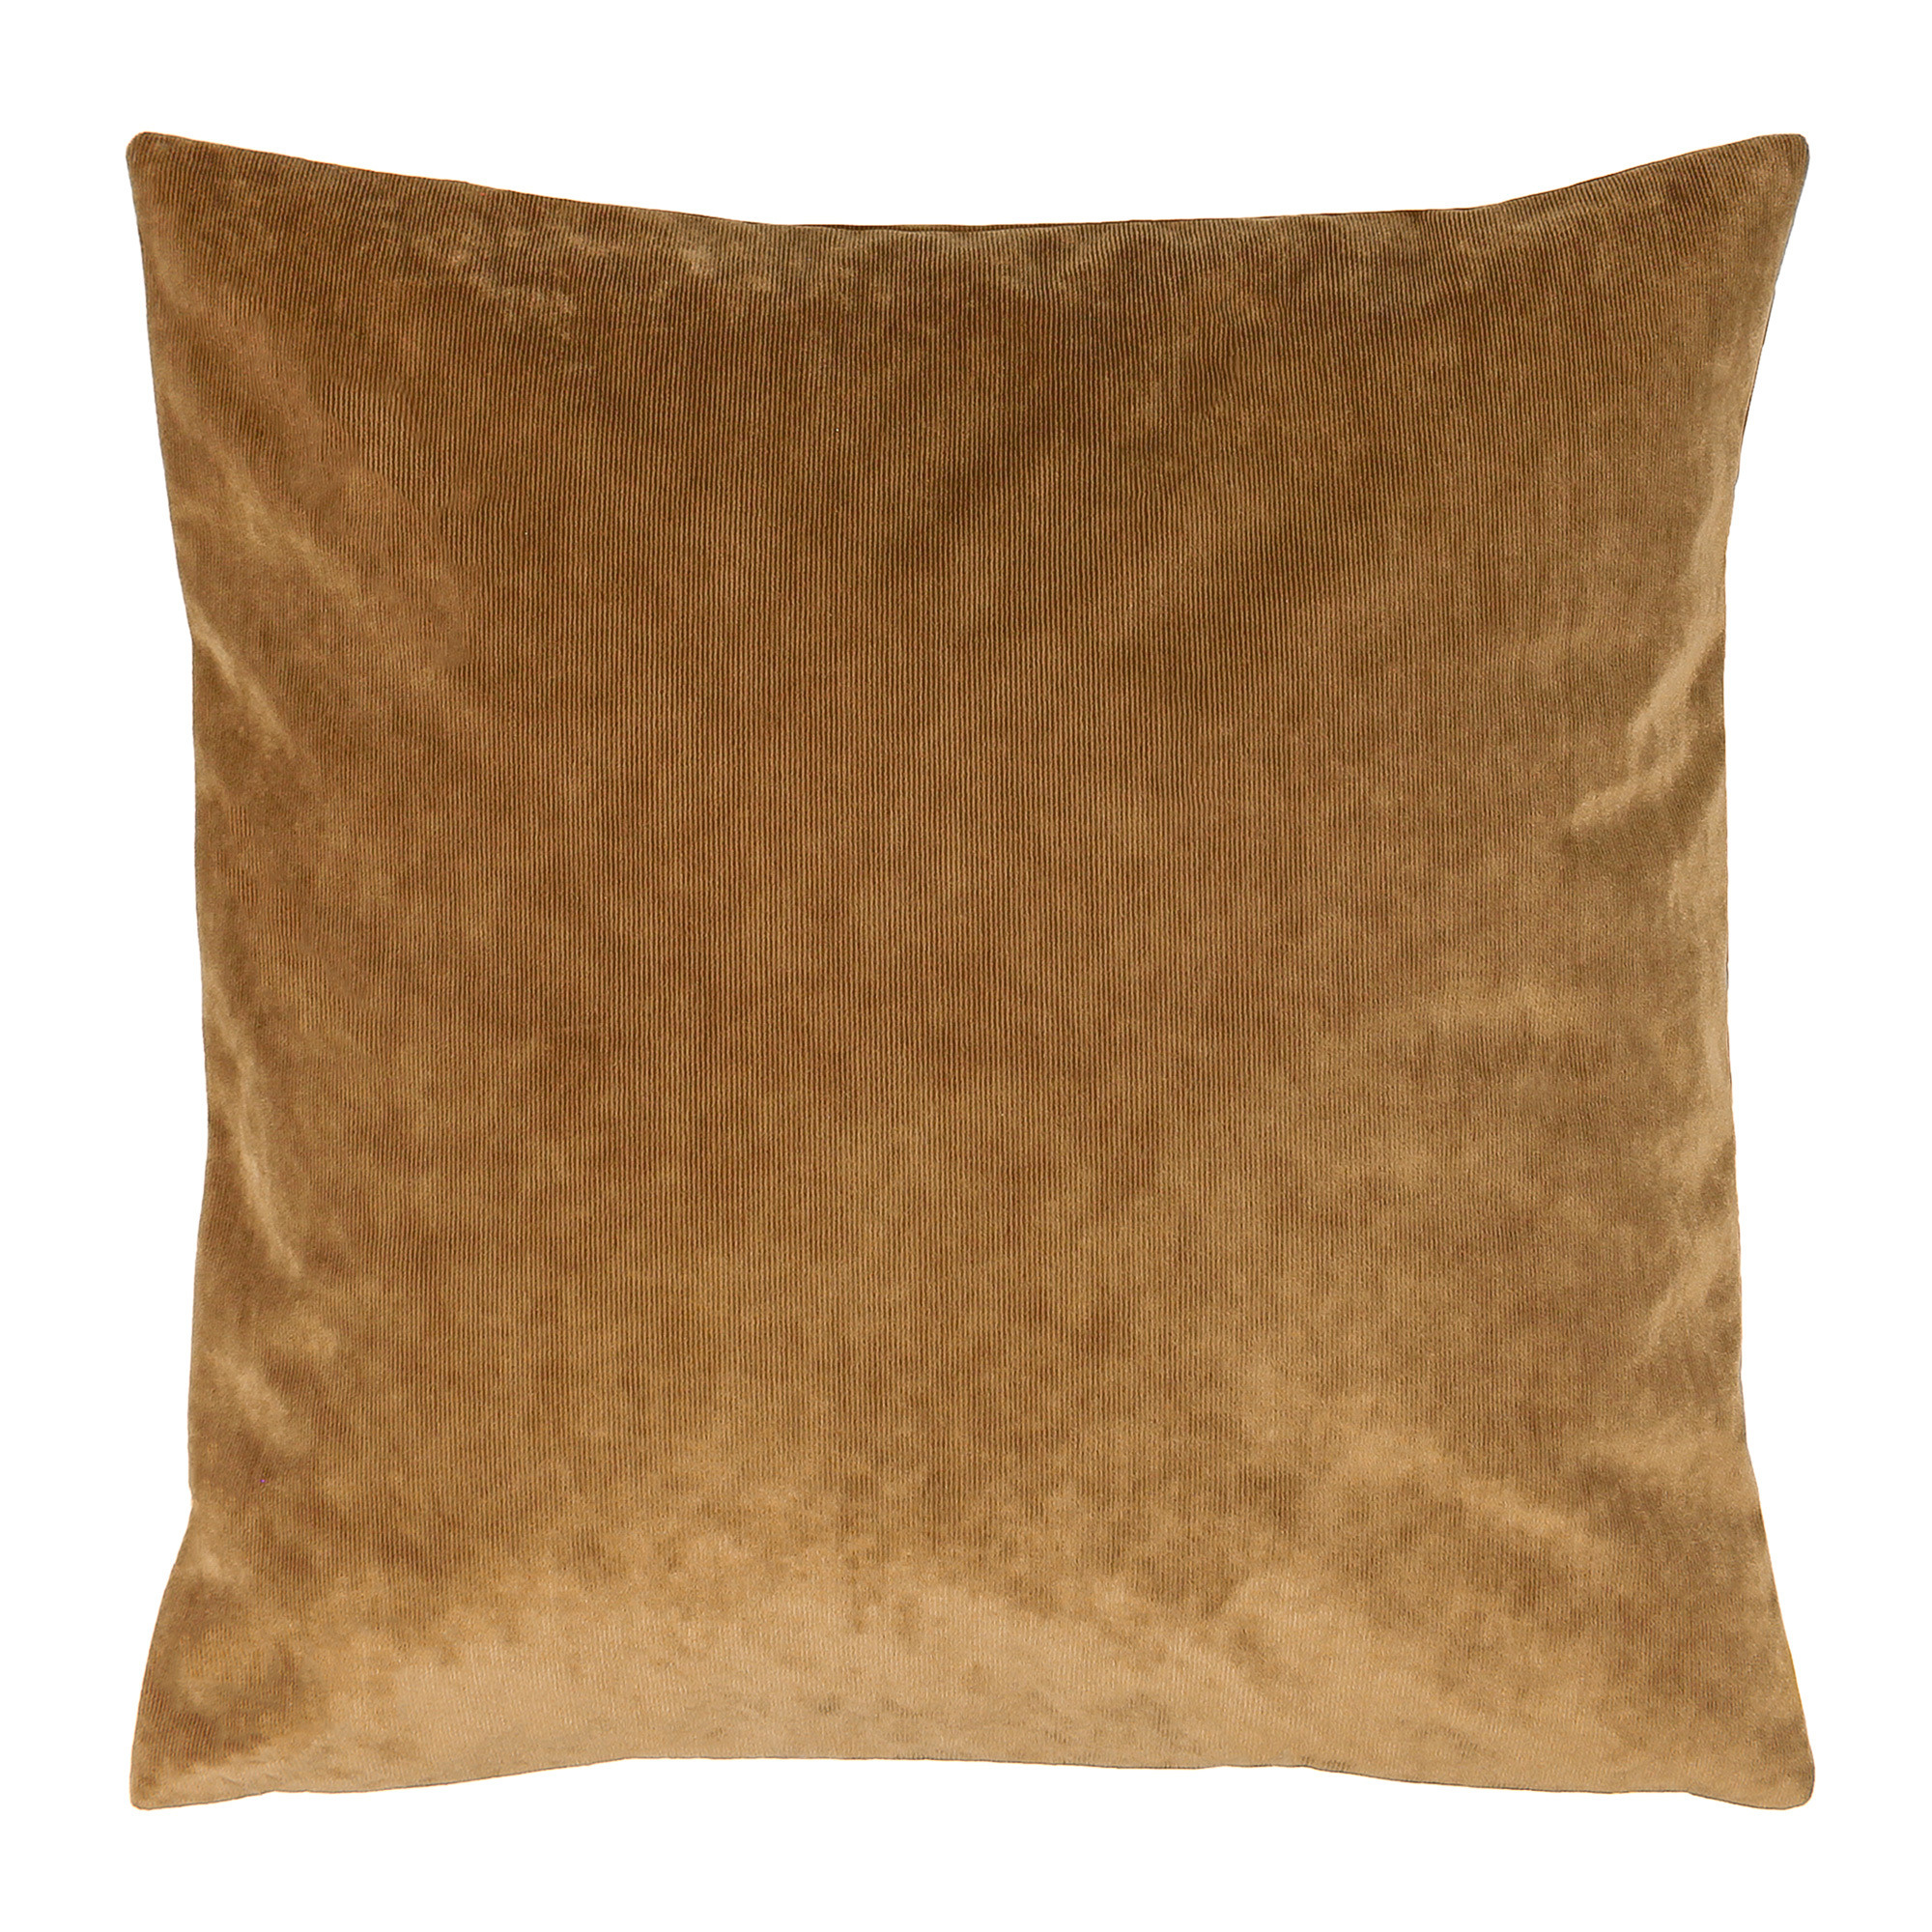 Golden Corduroy Cushion, Square, Brown Polyester - Barker & Stonehouse - image 1